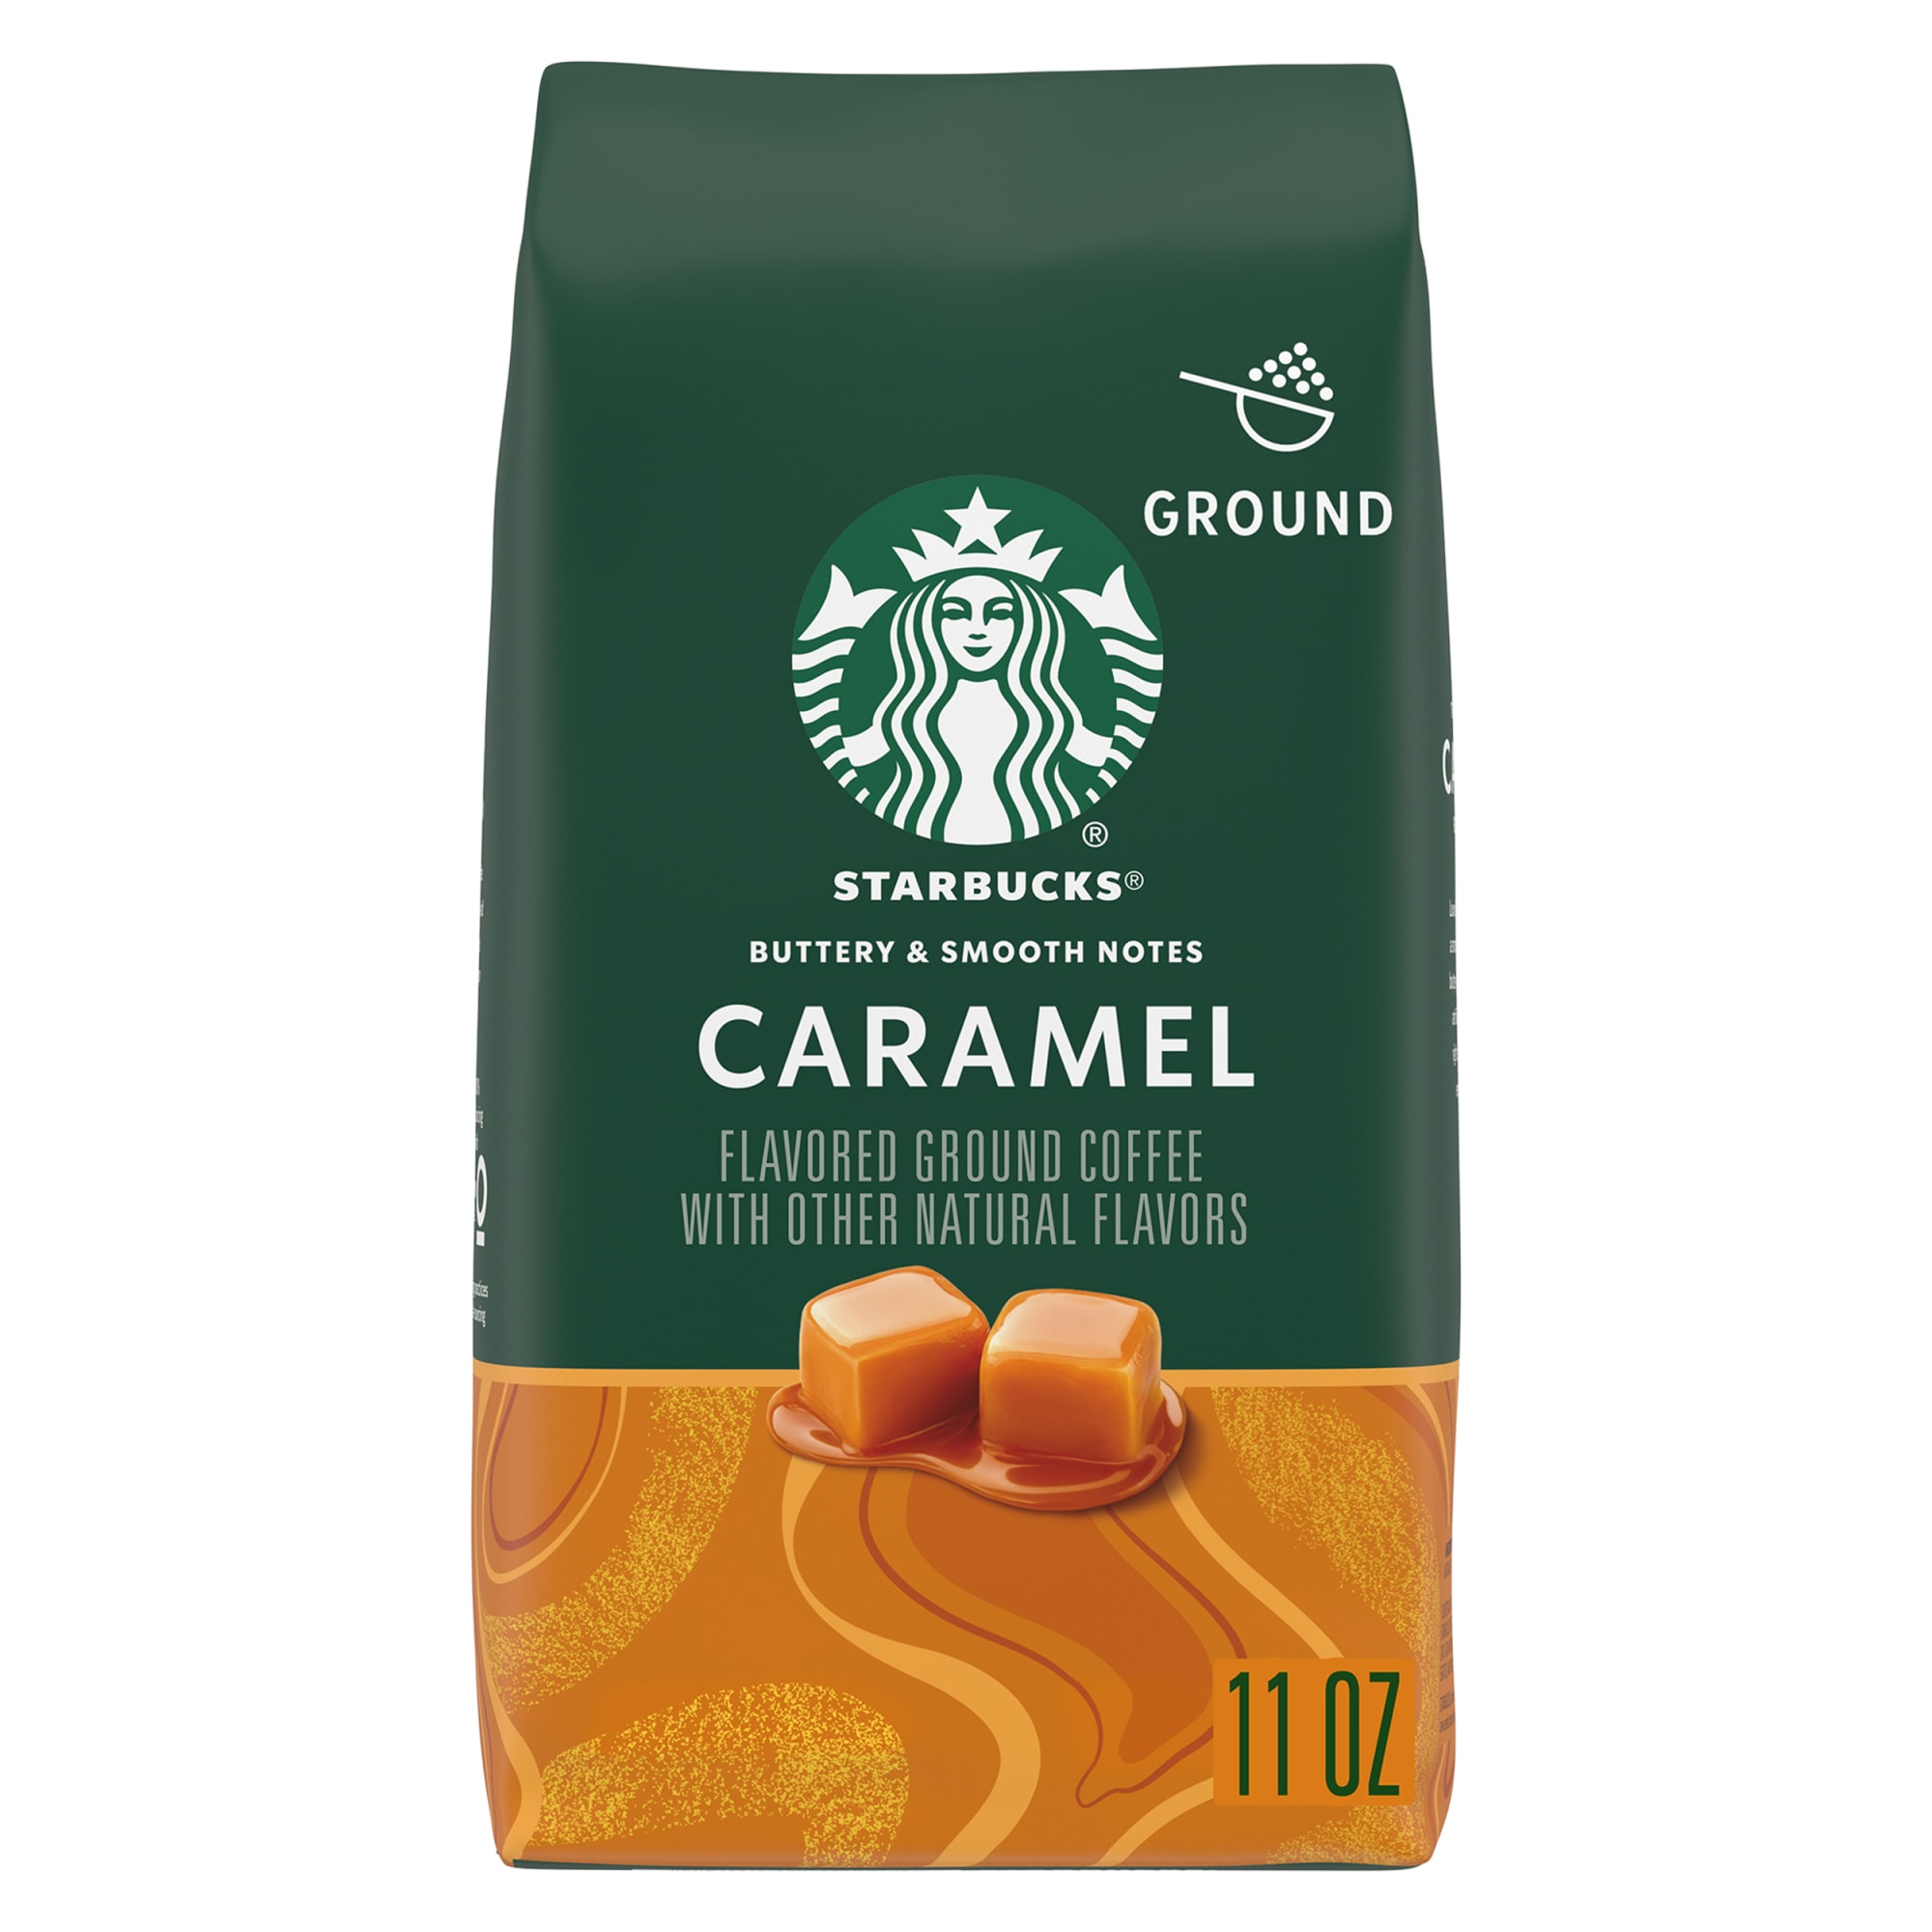 Starbucks Arabica Beans Caramel, Naturally Flavored, Ground Coffee, 11oz - image 1 of 7